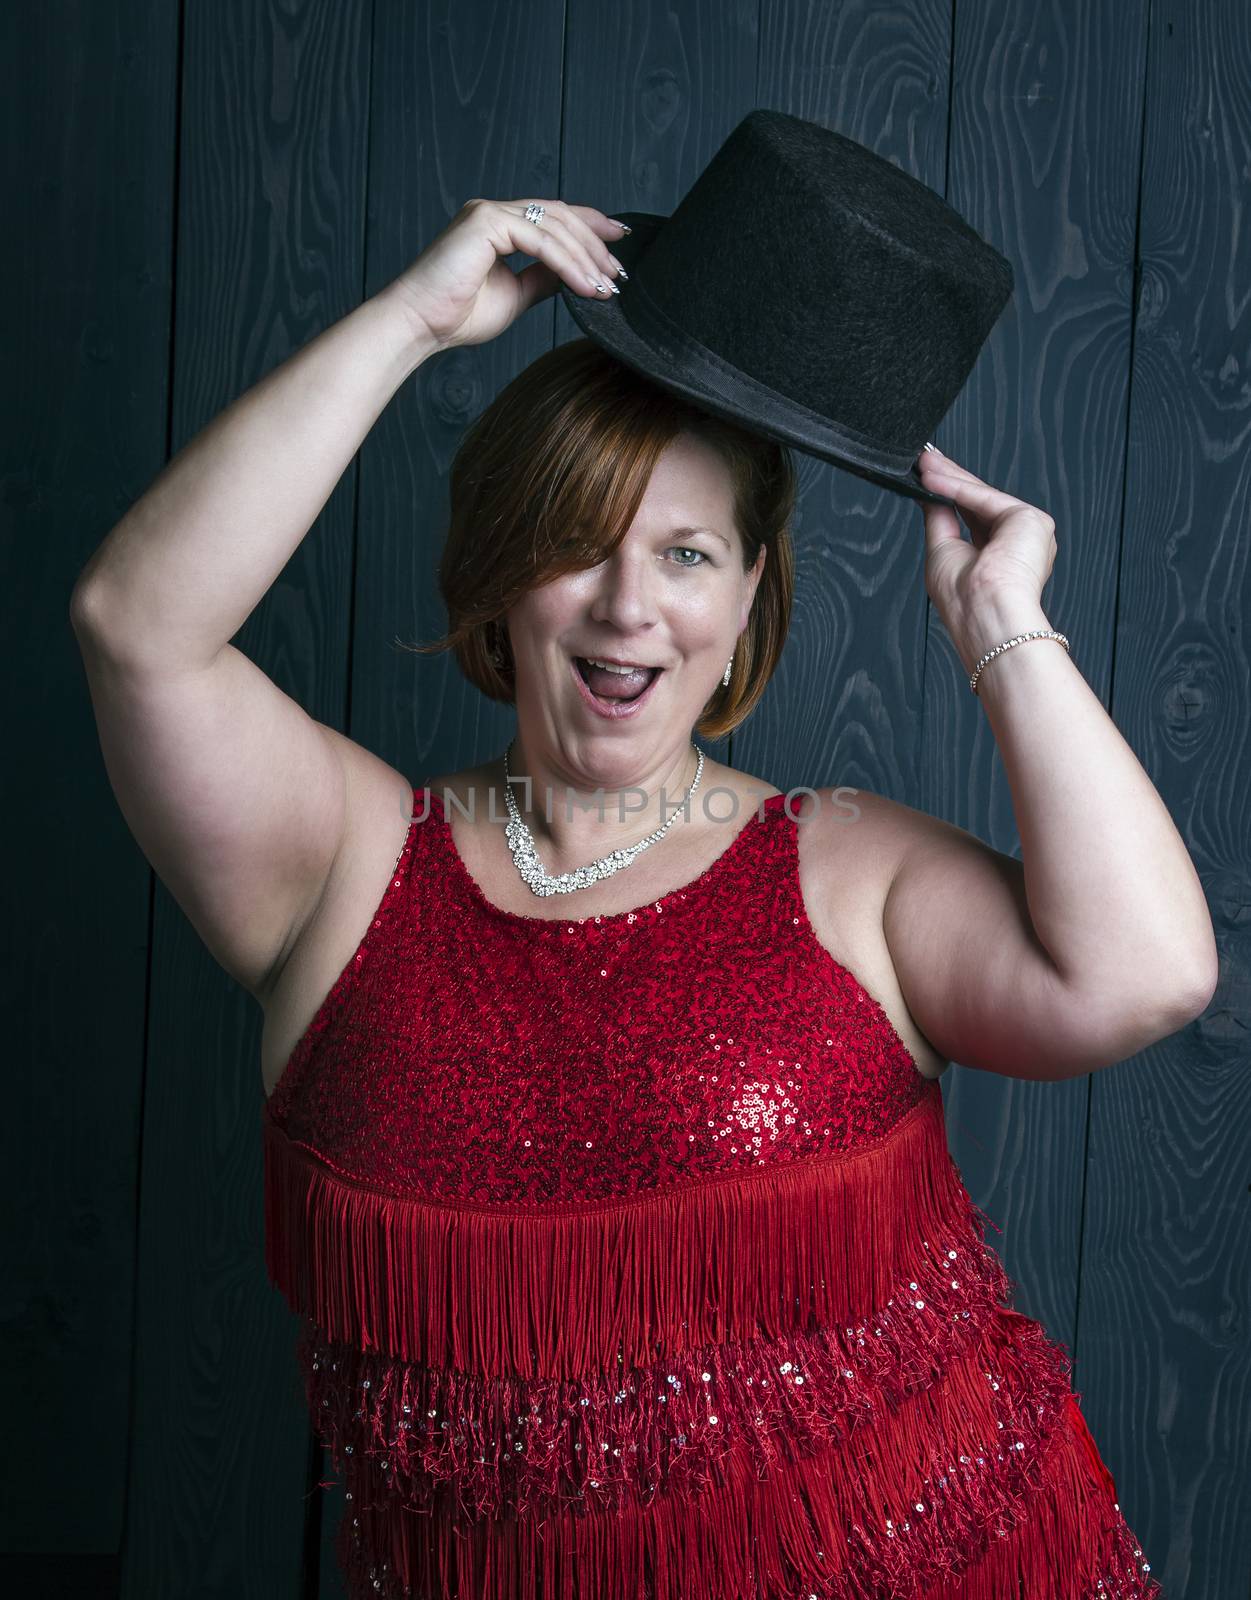 forty something brunette woman wearing a red sparkling dress dancing with a hat in front of blue wood panel